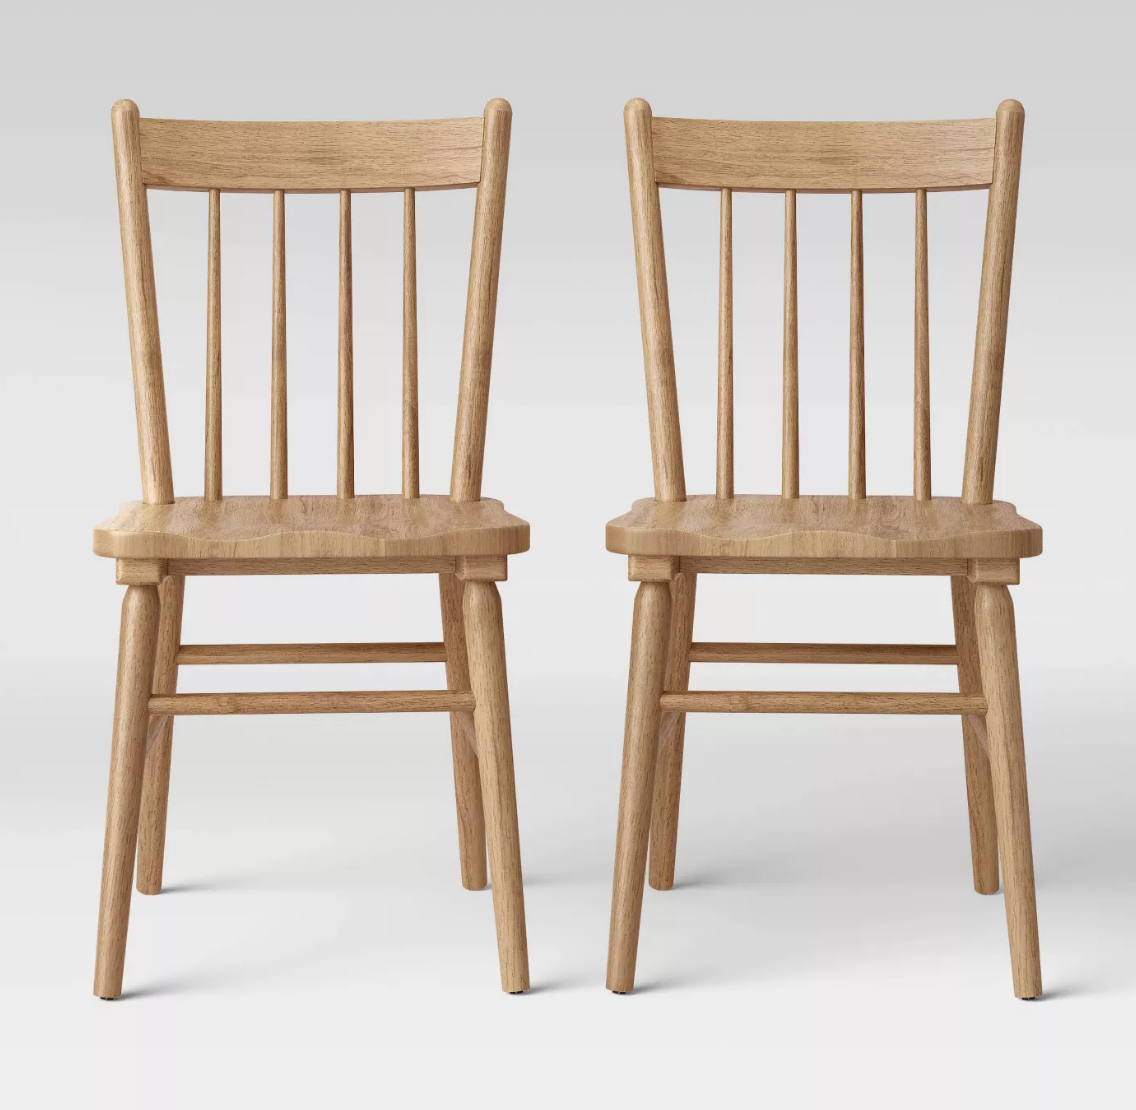 Target - Set of 2 Hassell Wood Dining Chairs - $180